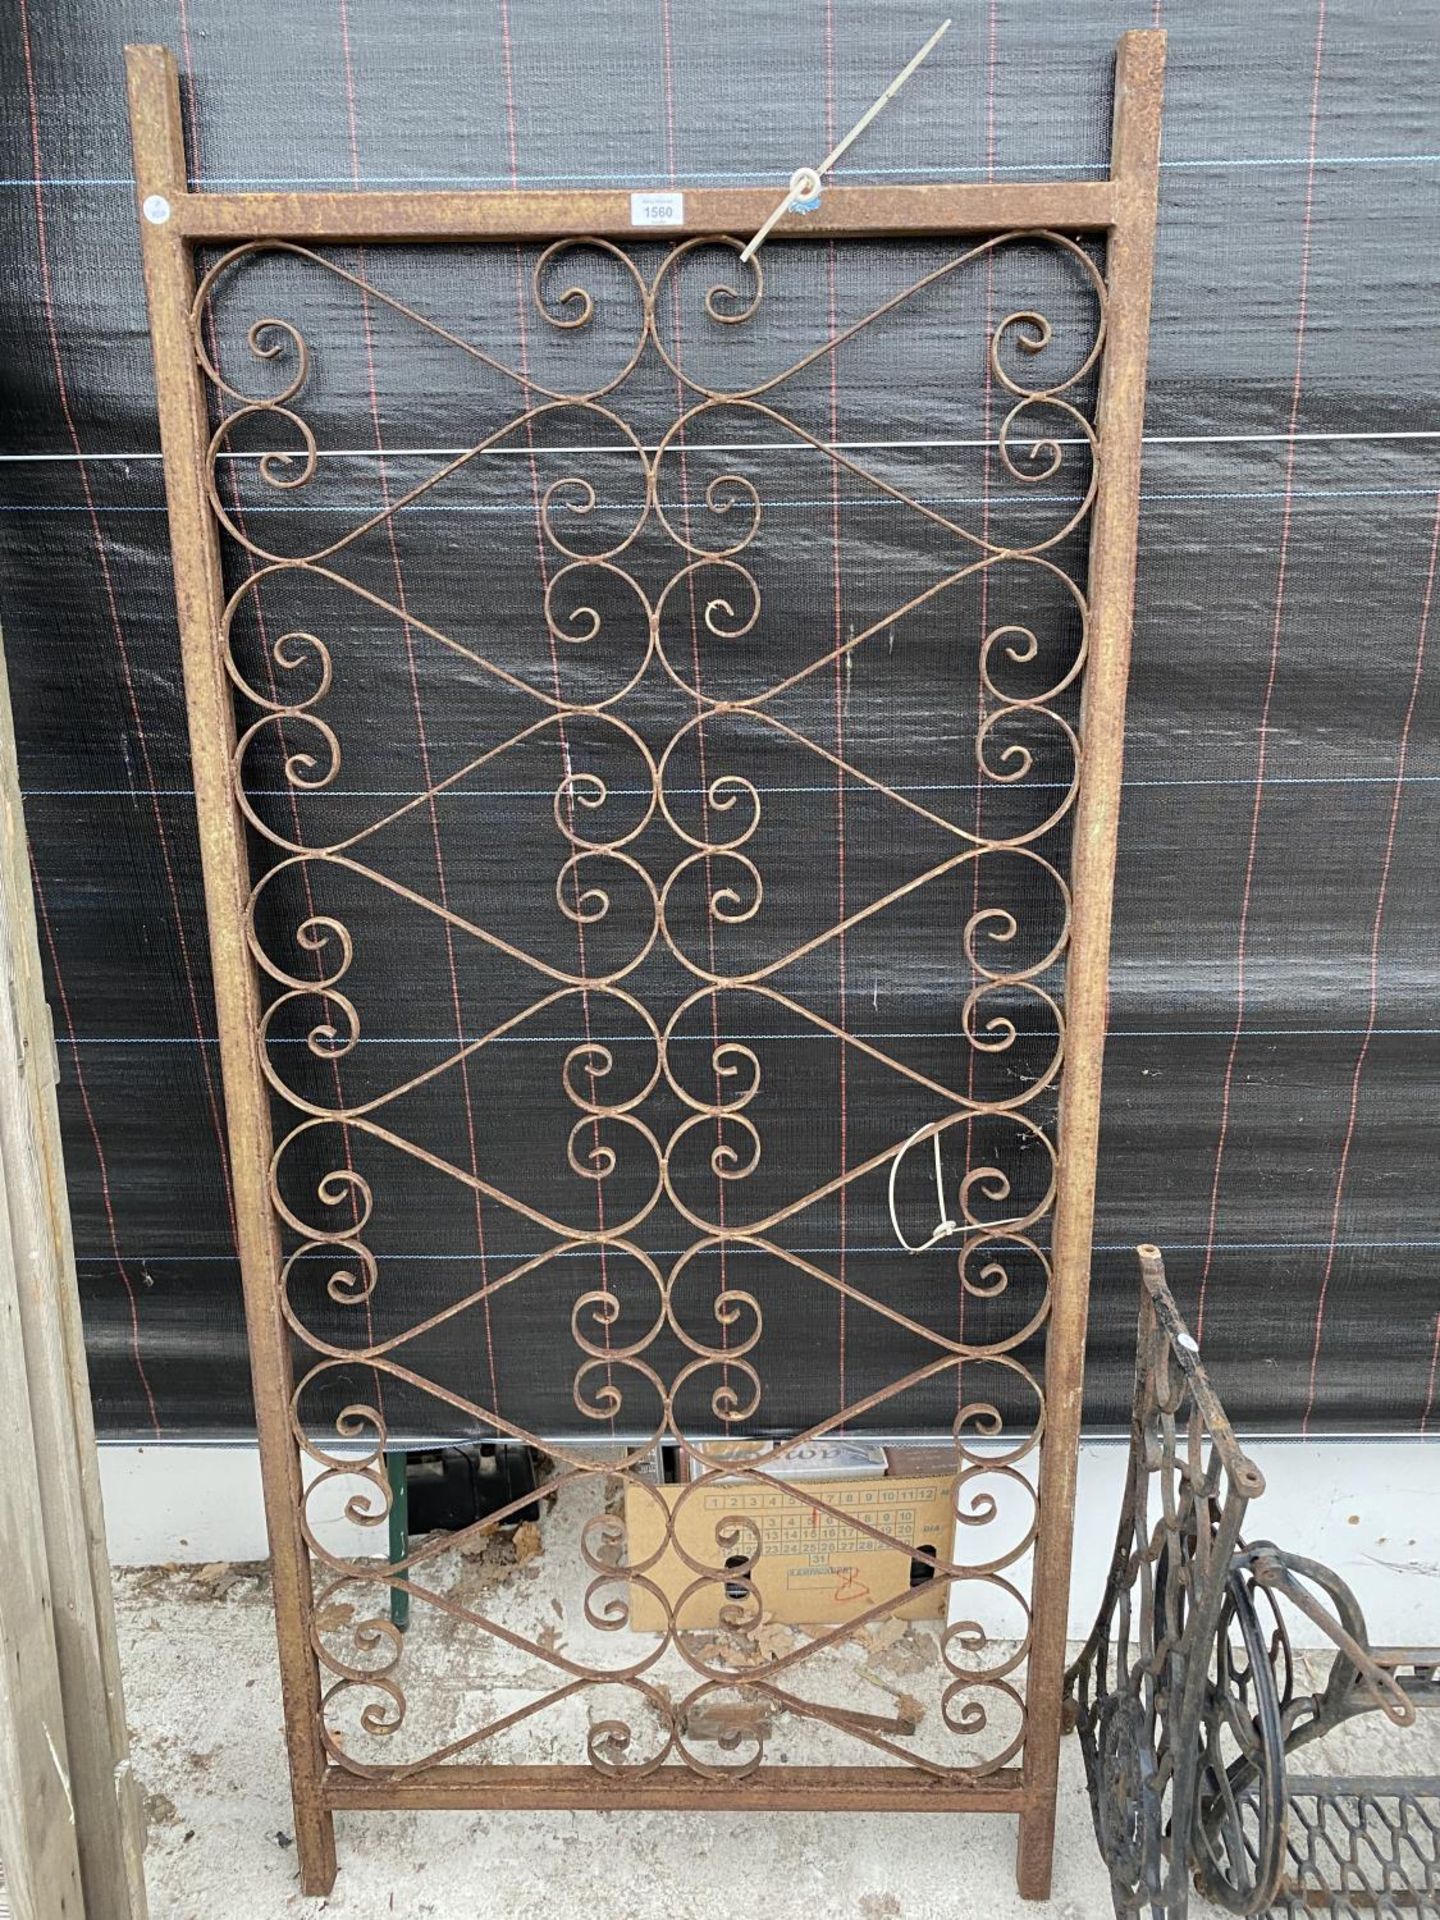 A SECTION OF DECORATIVE WROUGHT IRON RAILING AND A SINGER TREADLE BASE - Image 4 of 5